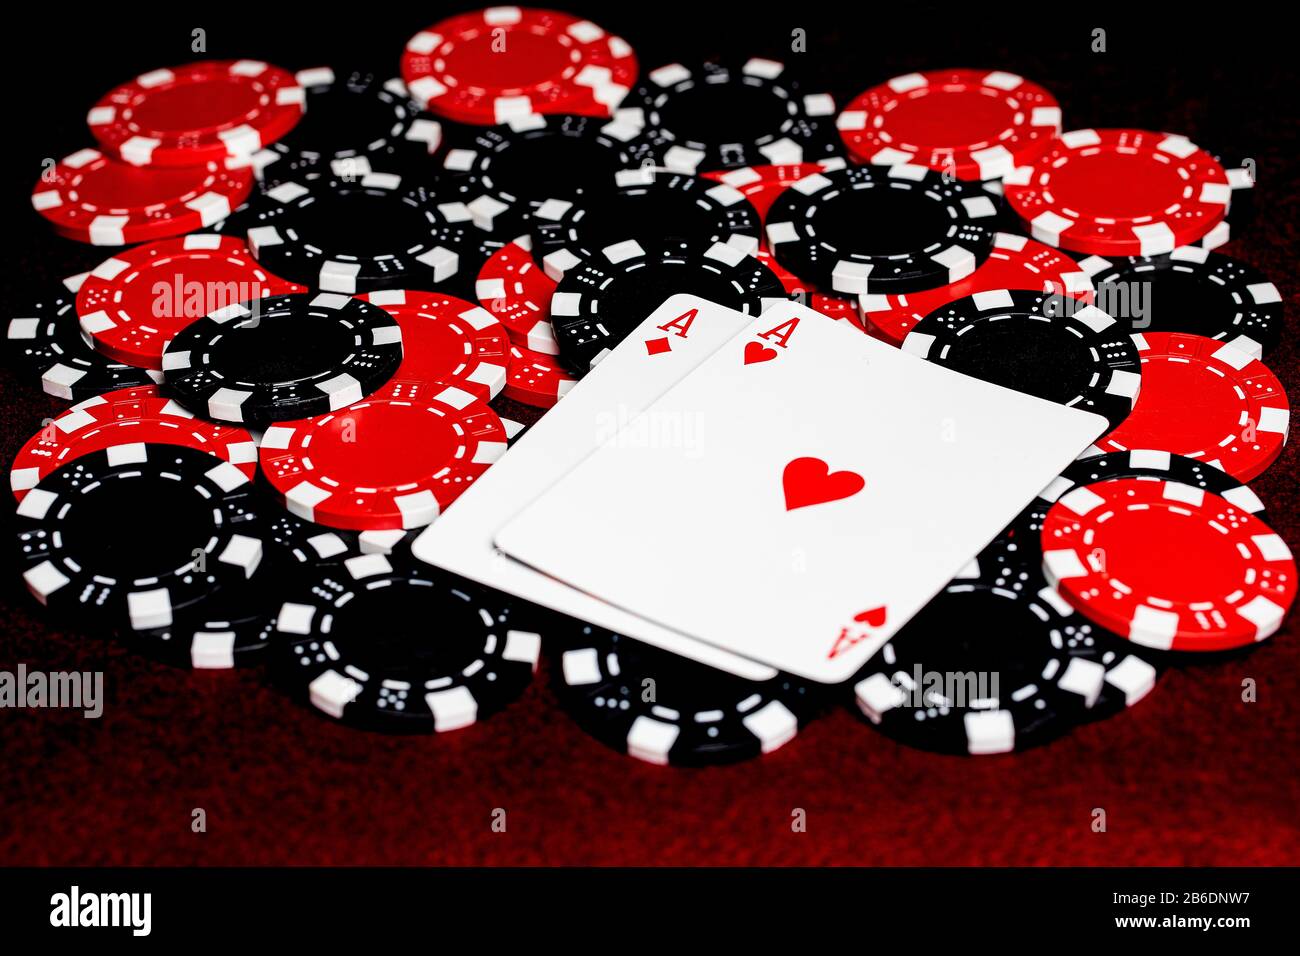 A pair of red aces, diamonds and hearts, on a pile or red and black clay poker chips.  Room for copy in the lower left of the image on the red felt ta Stock Photo